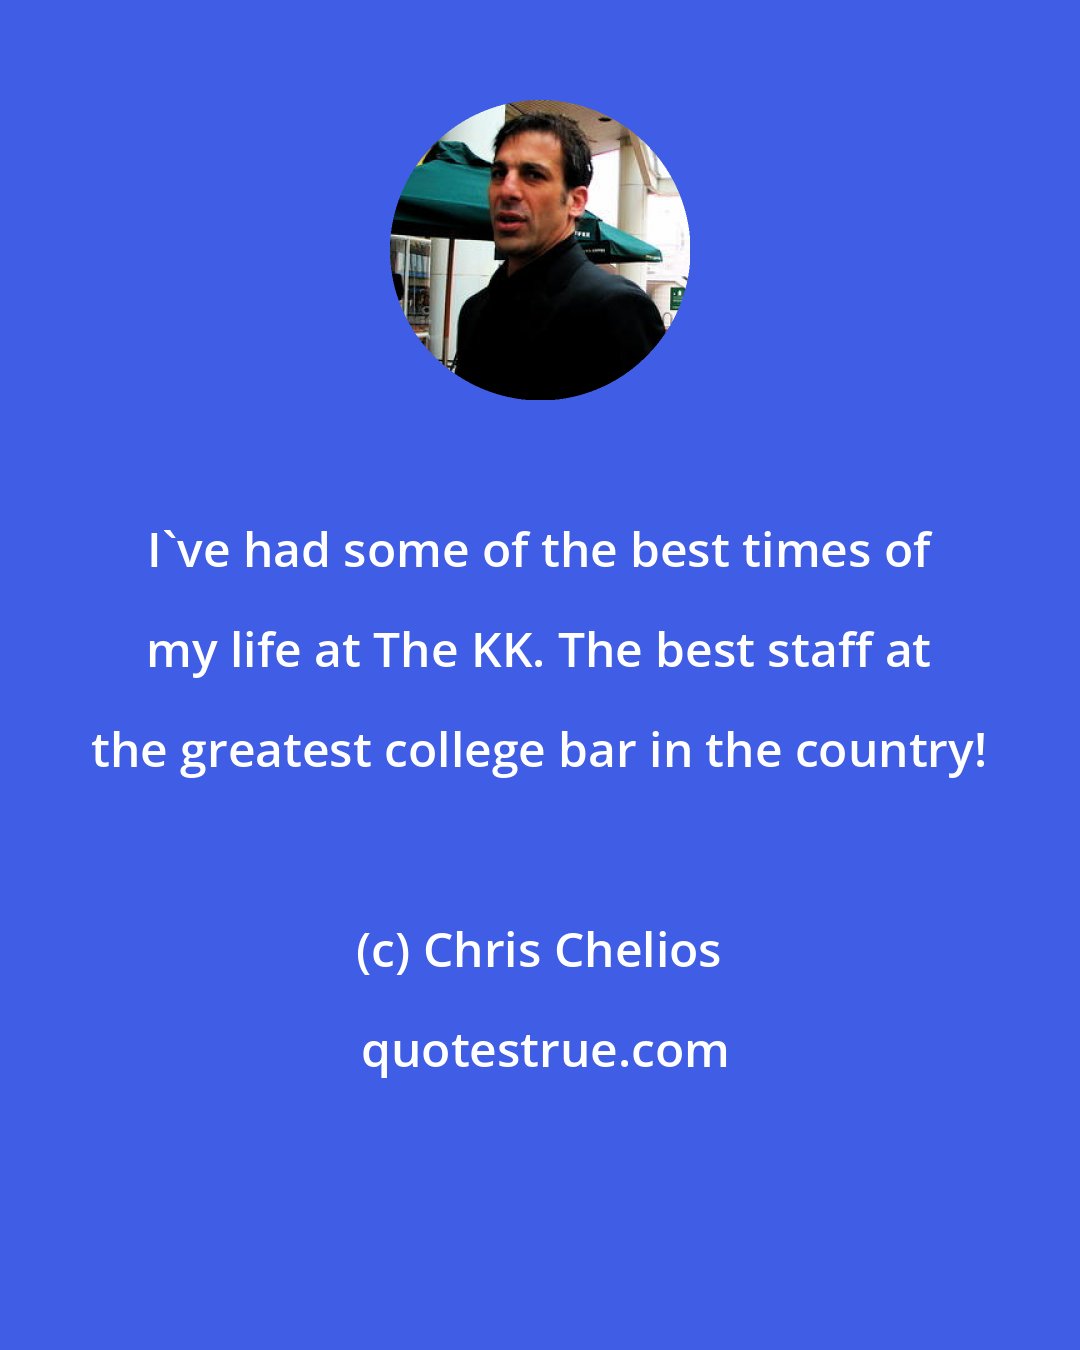 Chris Chelios: I've had some of the best times of my life at The KK. The best staff at the greatest college bar in the country!